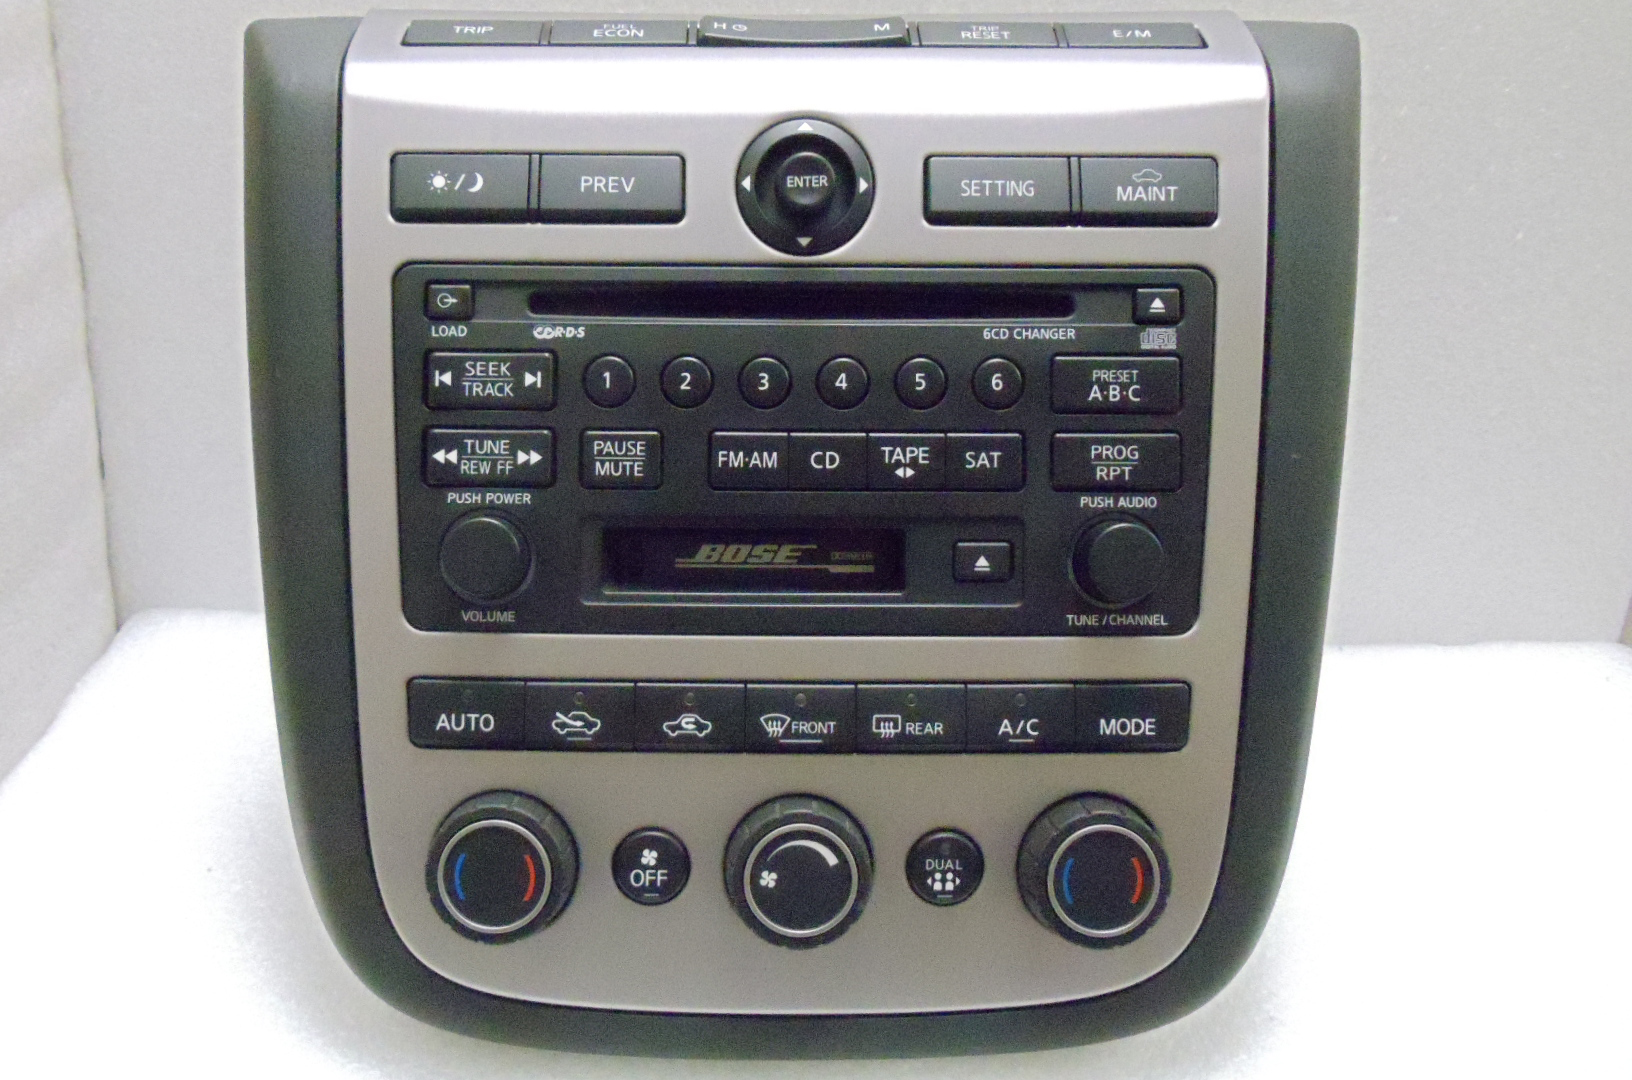 Nissan murano bose stereo problems